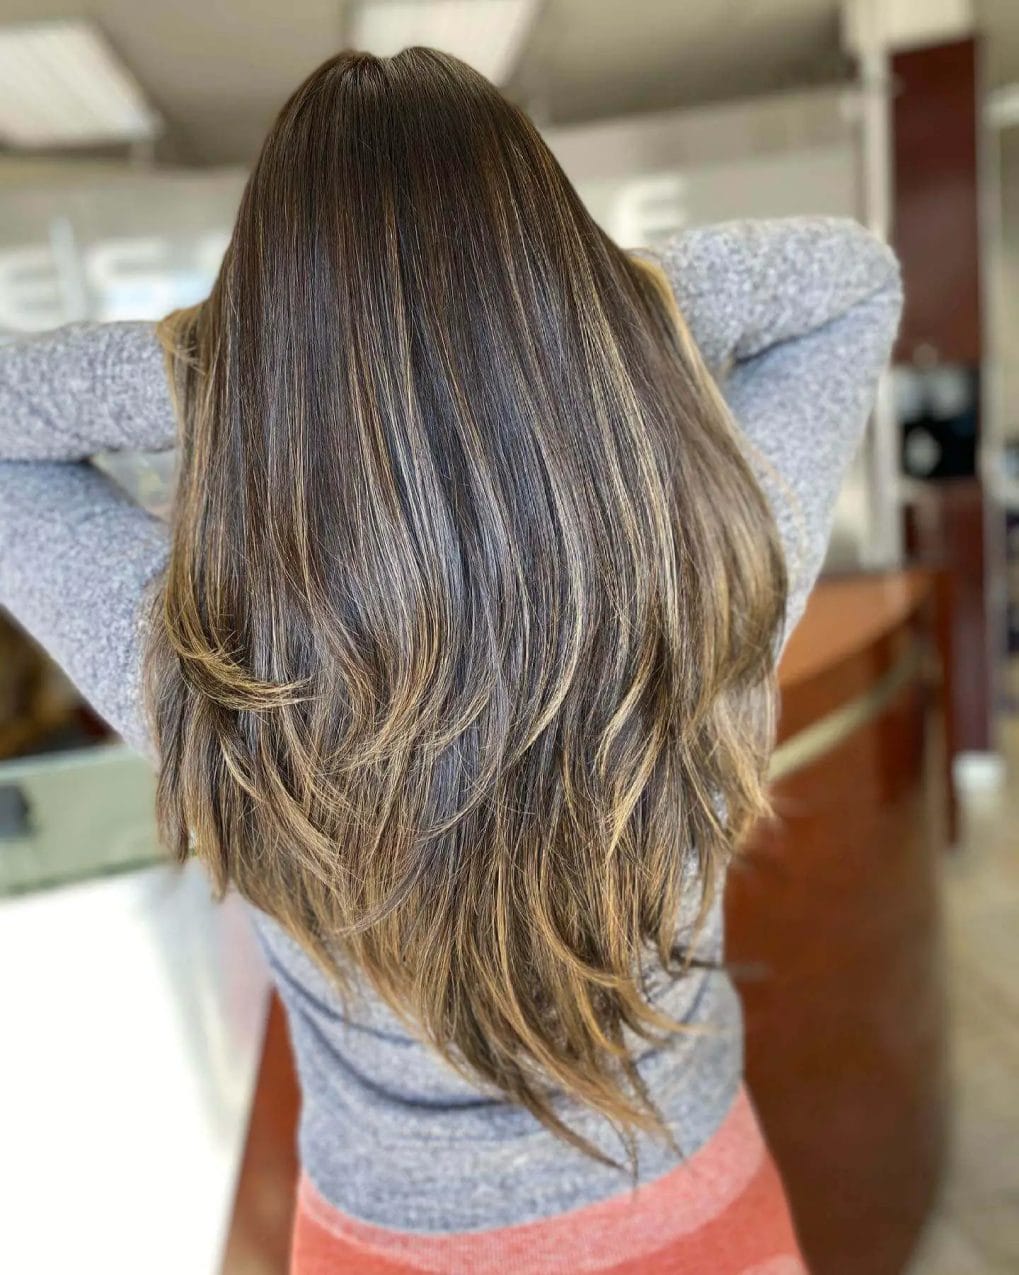 Soft blowout hairstyle with base bump balayage and V-cut layers.